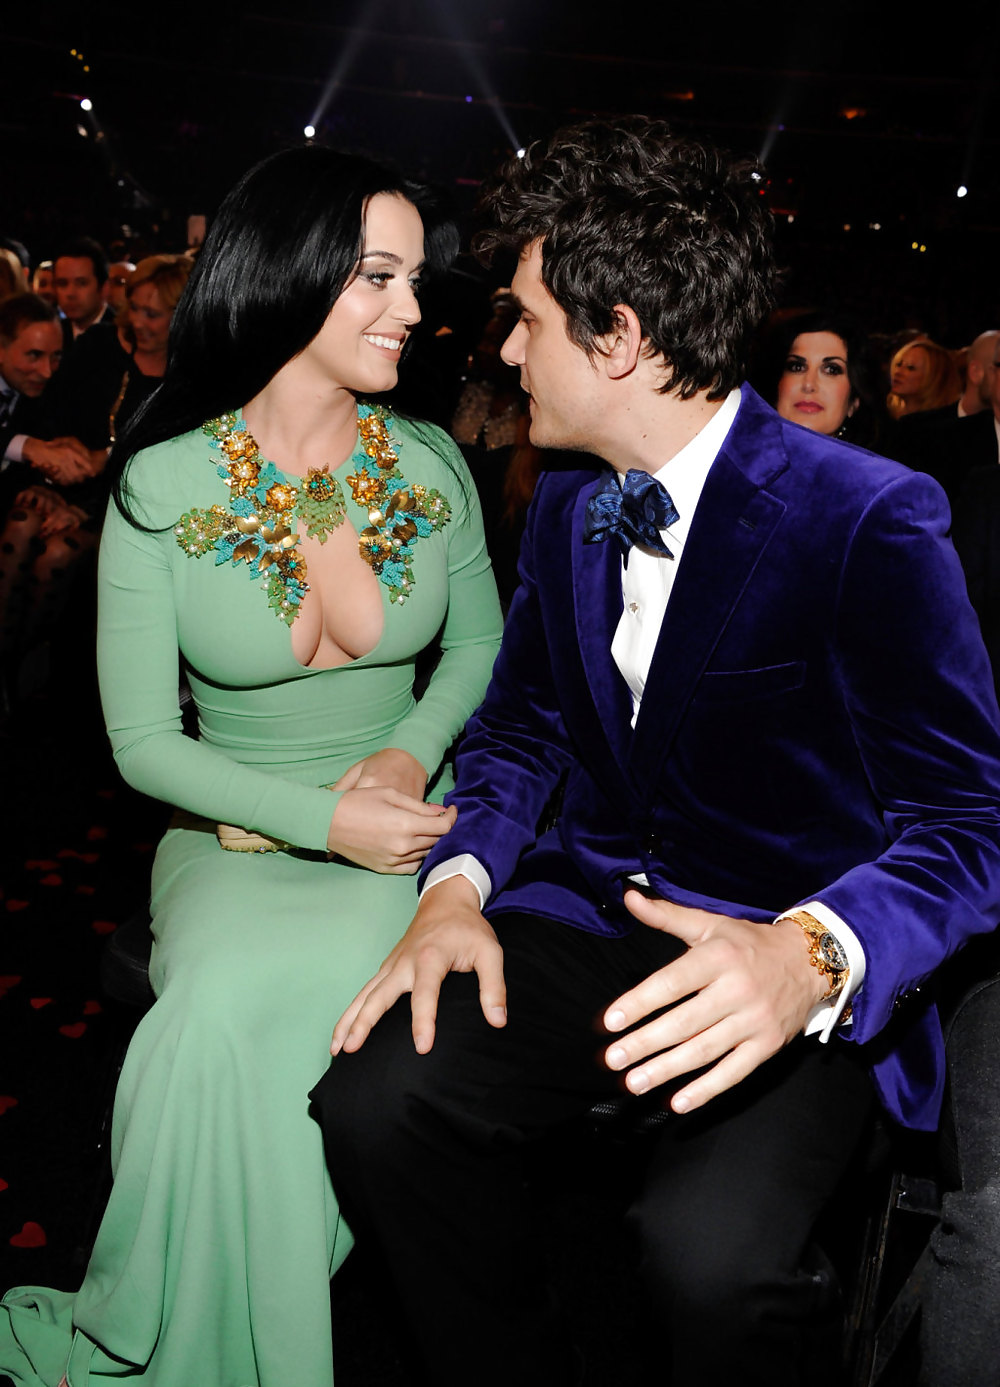 Katy Perry The Famous Green Dress #22134257